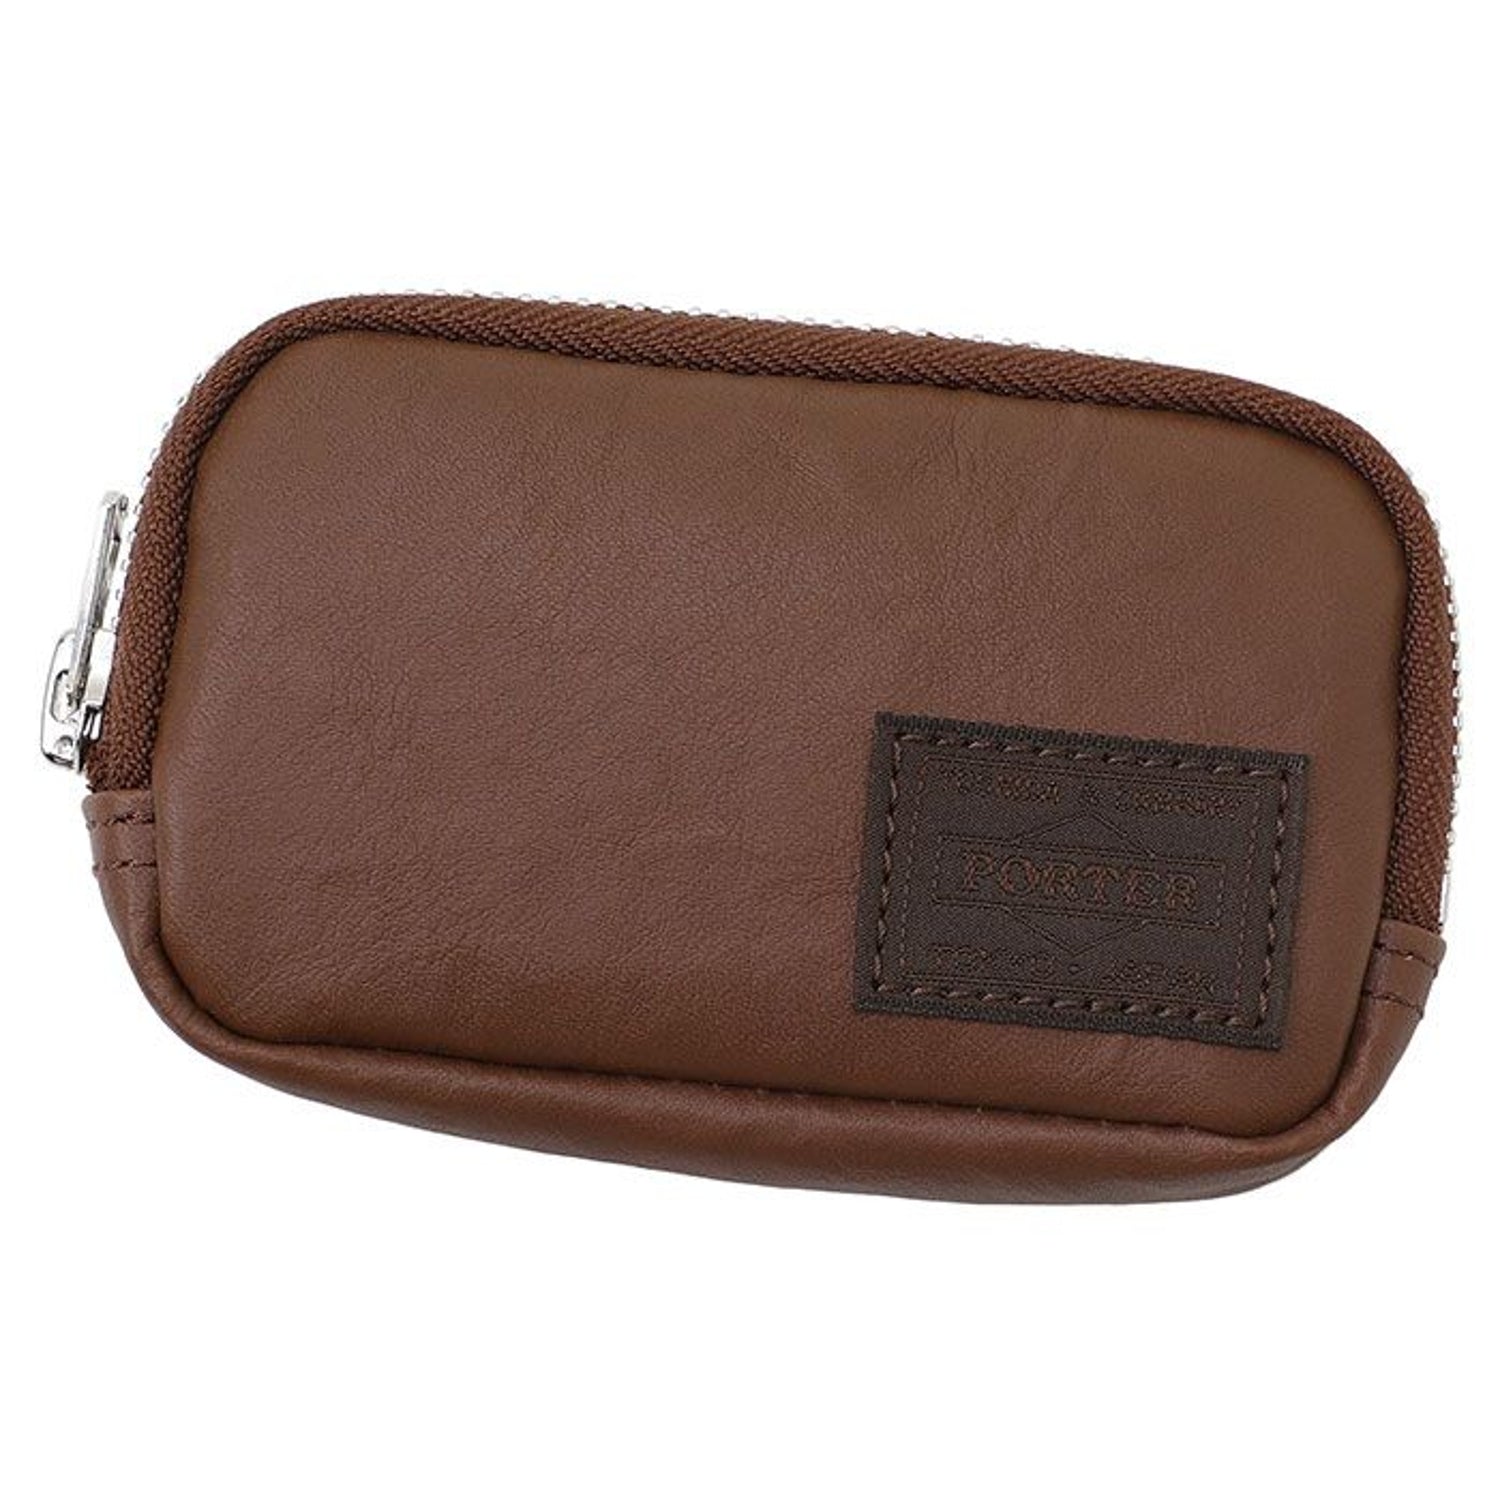 FREESTYLE DYNEEMA LEATHER MULTI COIN CASE - BROWN